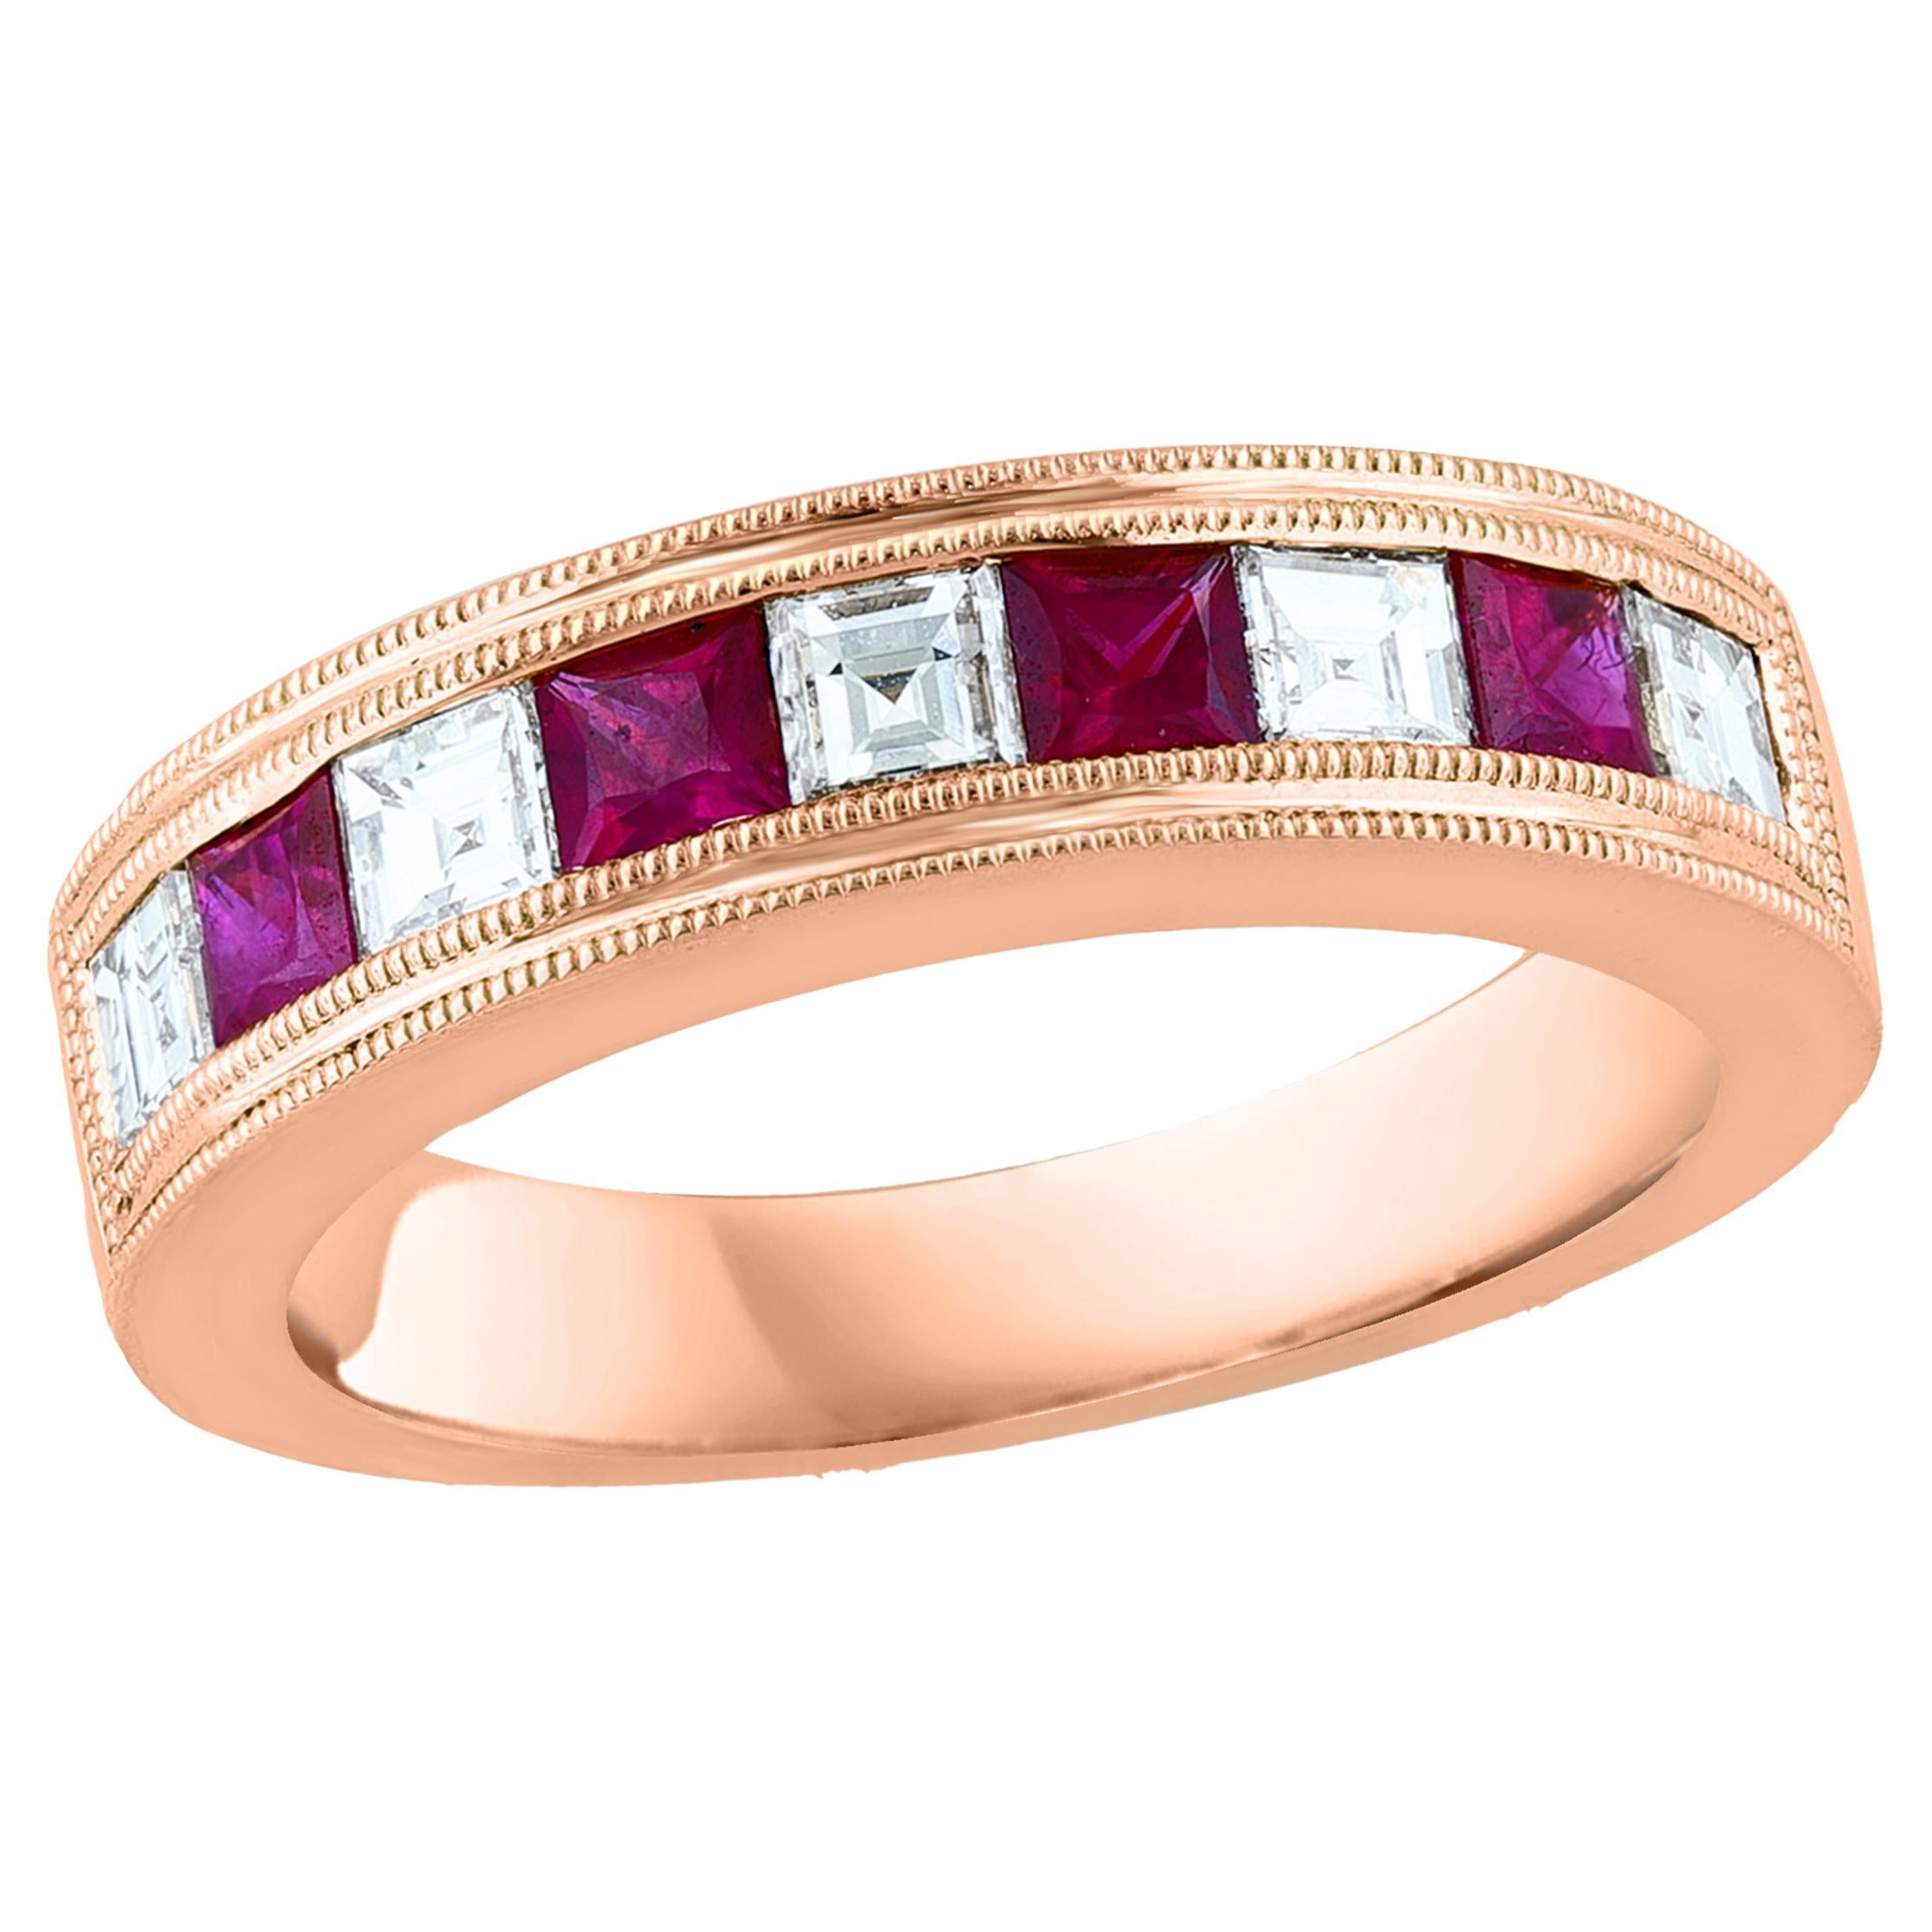 0.57 Carat Princess Cut Ruby and Diamond Band in 18K Rose Gold For Sale